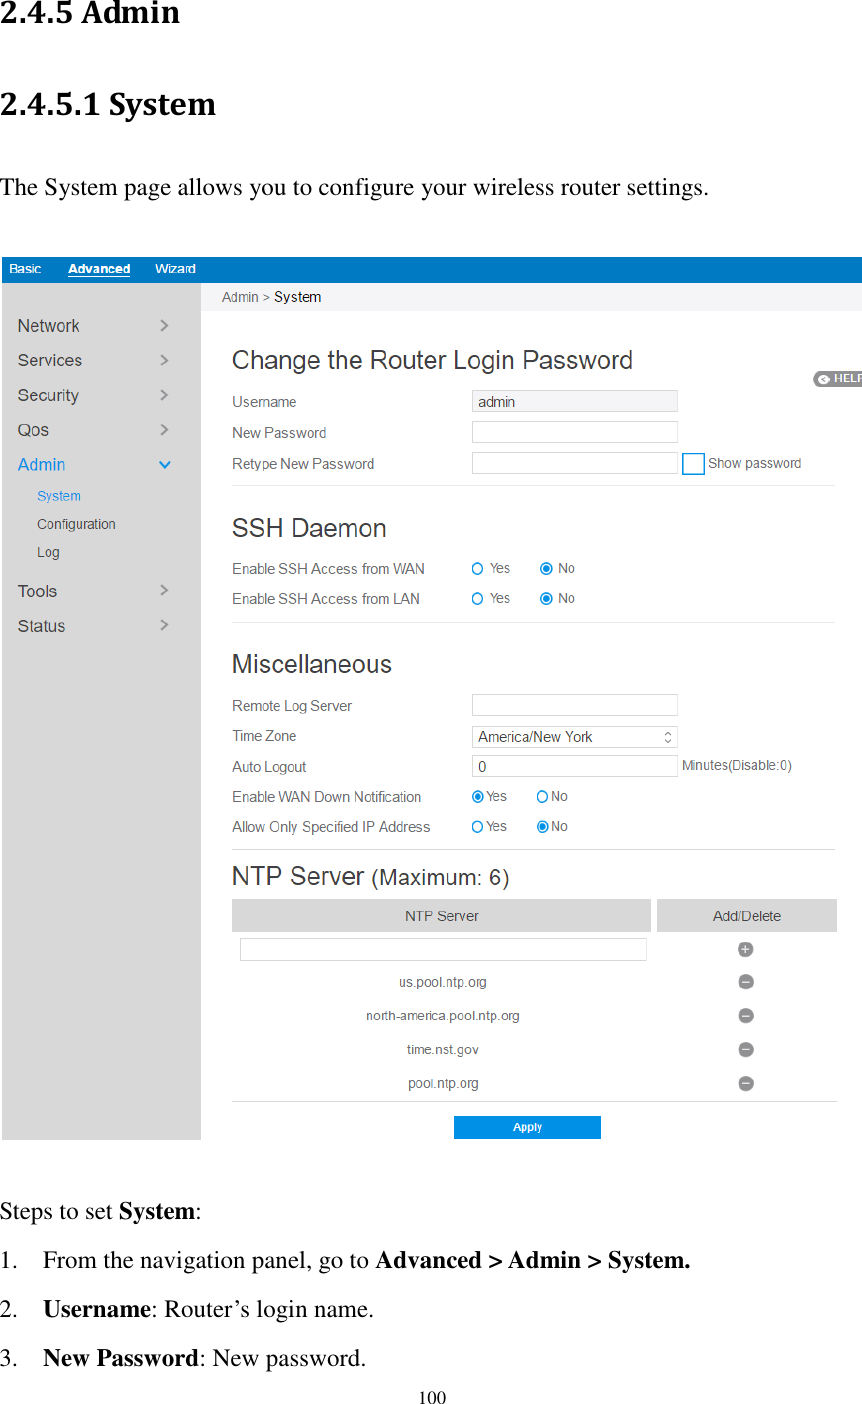  100  2.4.5 Admin 2.4.5.1 System The System page allows you to configure your wireless router settings.    Steps to set System:   1. From the navigation panel, go to Advanced &gt; Admin &gt; System.   2. Username: Router’s login name. 3. New Password: New password. 